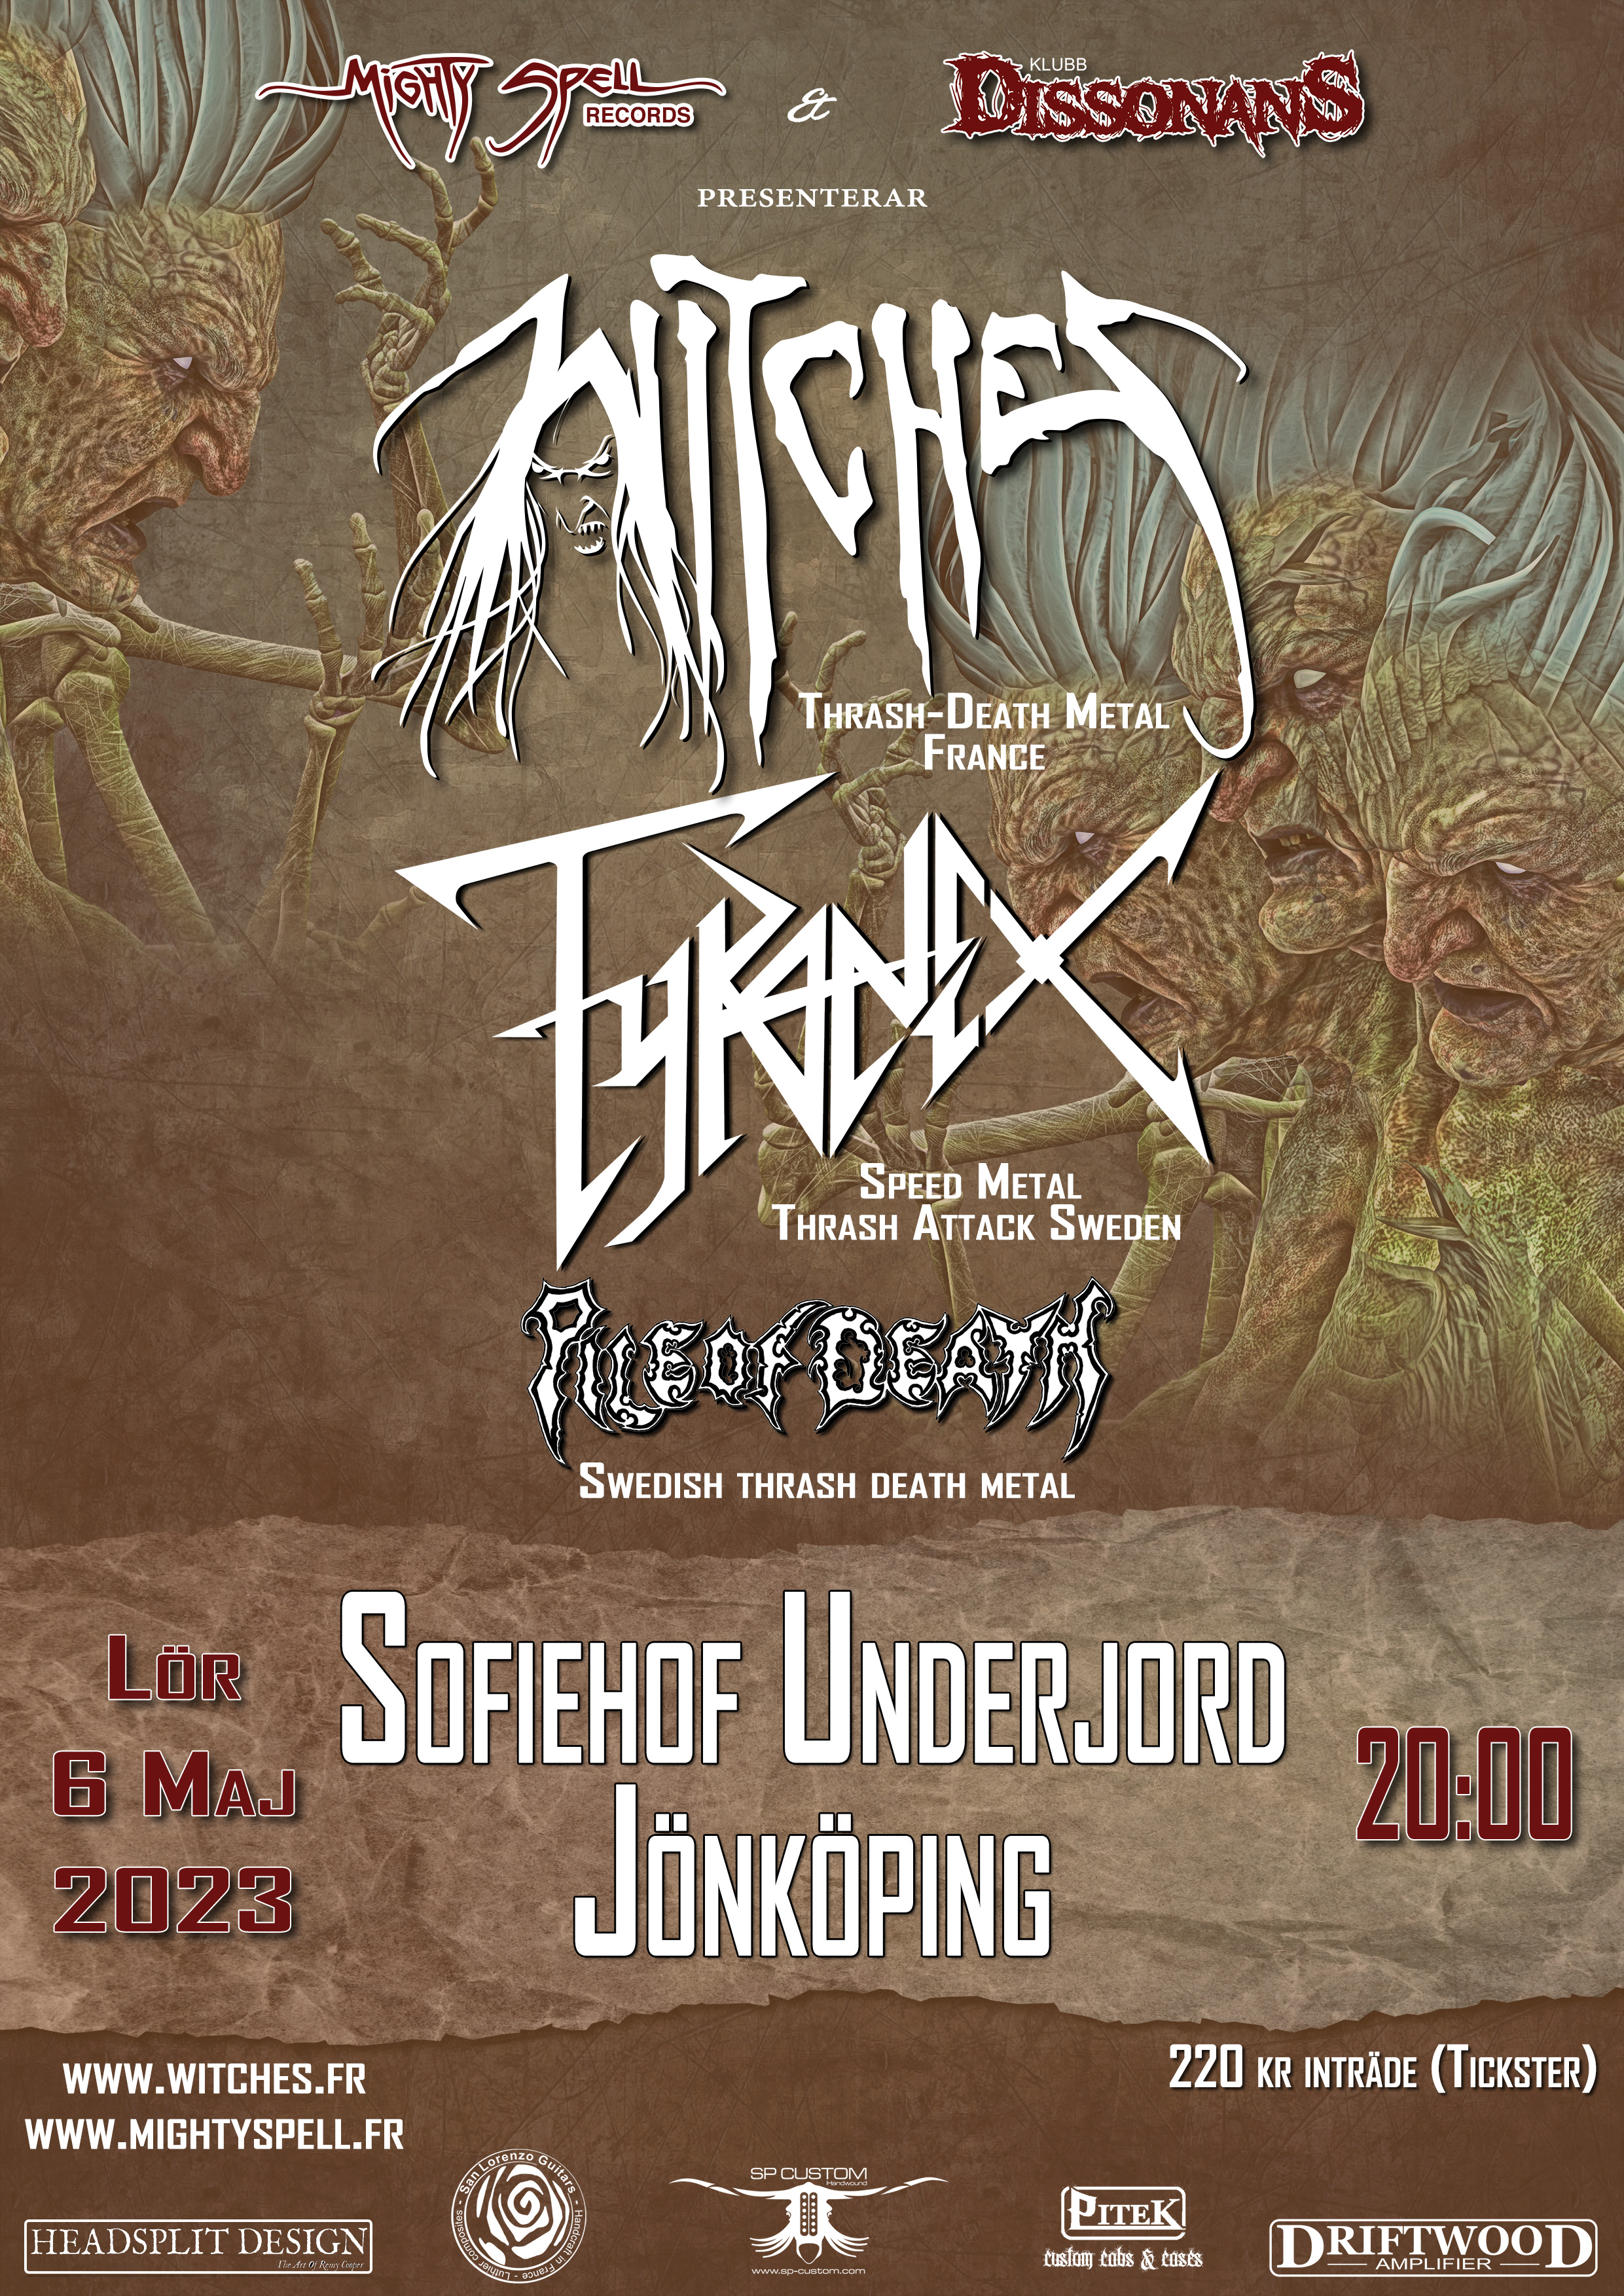 Witches flyer Witches + Tyranex + Pile of Death @ Klubb Dissonnans Sofiehof Underjord J�nk�ping, Sweden